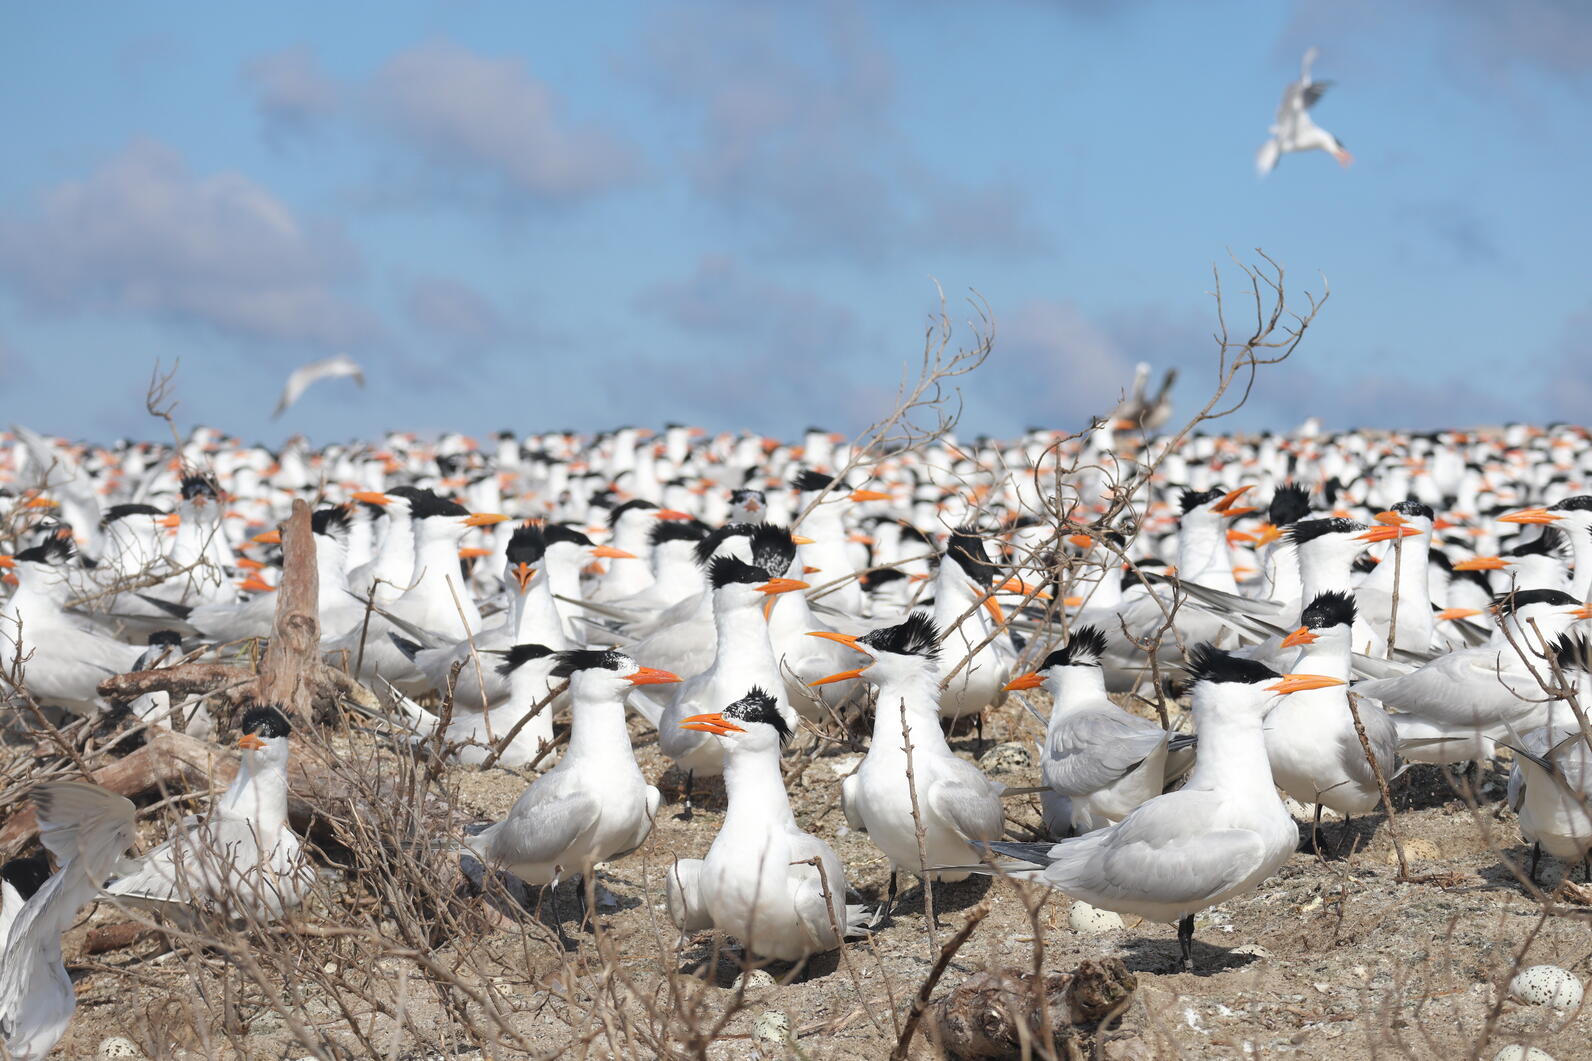 Royal and Sandwich Tern Colony on South Pelican Island. Photo: Brittany Salmons/Audubon